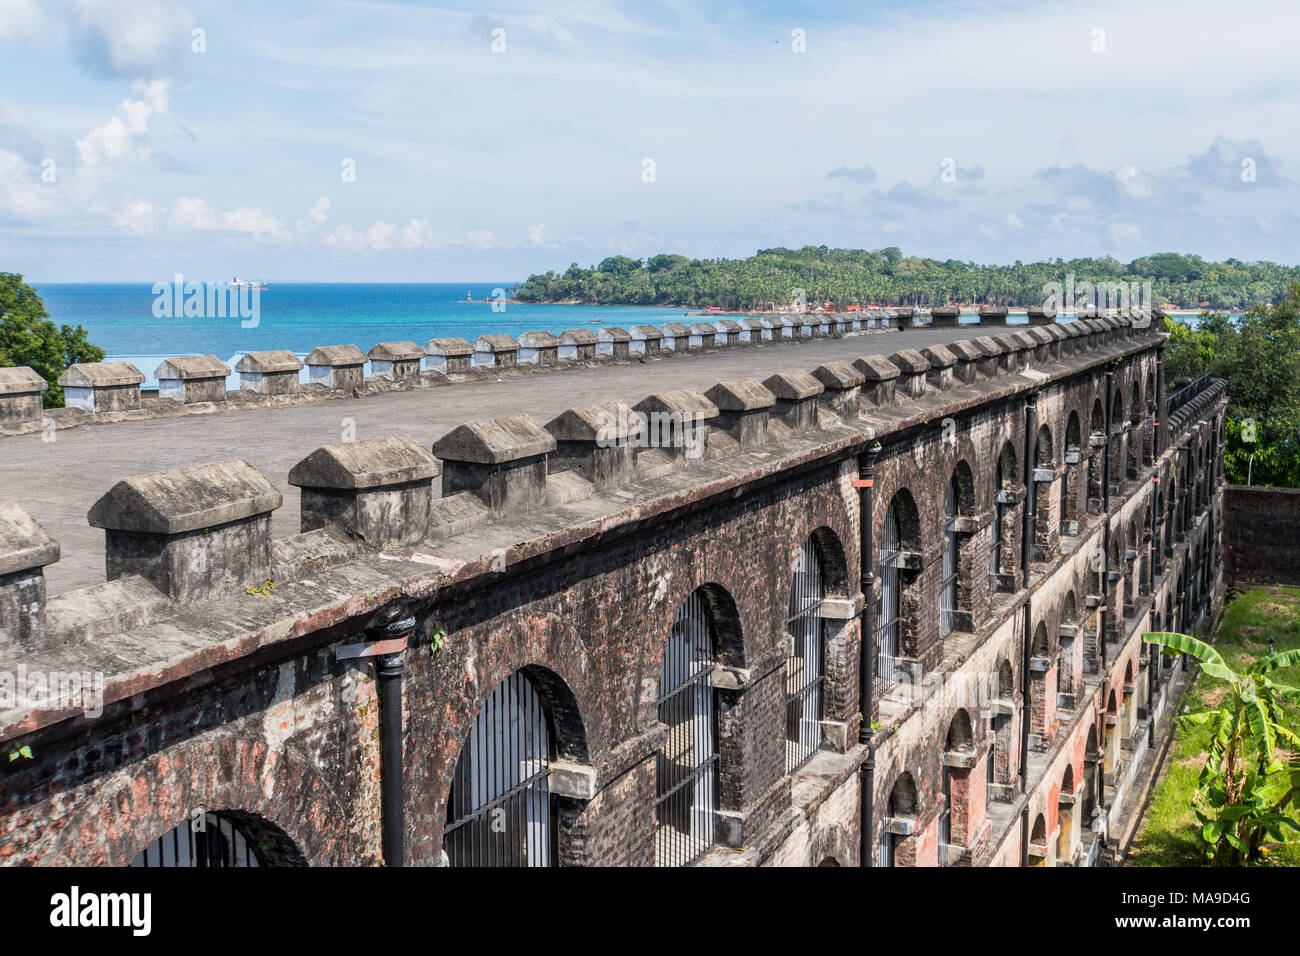 View of Ross island from the infamous cellular jail where Indian political leaders where confined to solitary confinement and tortured by the British. Stock Photo